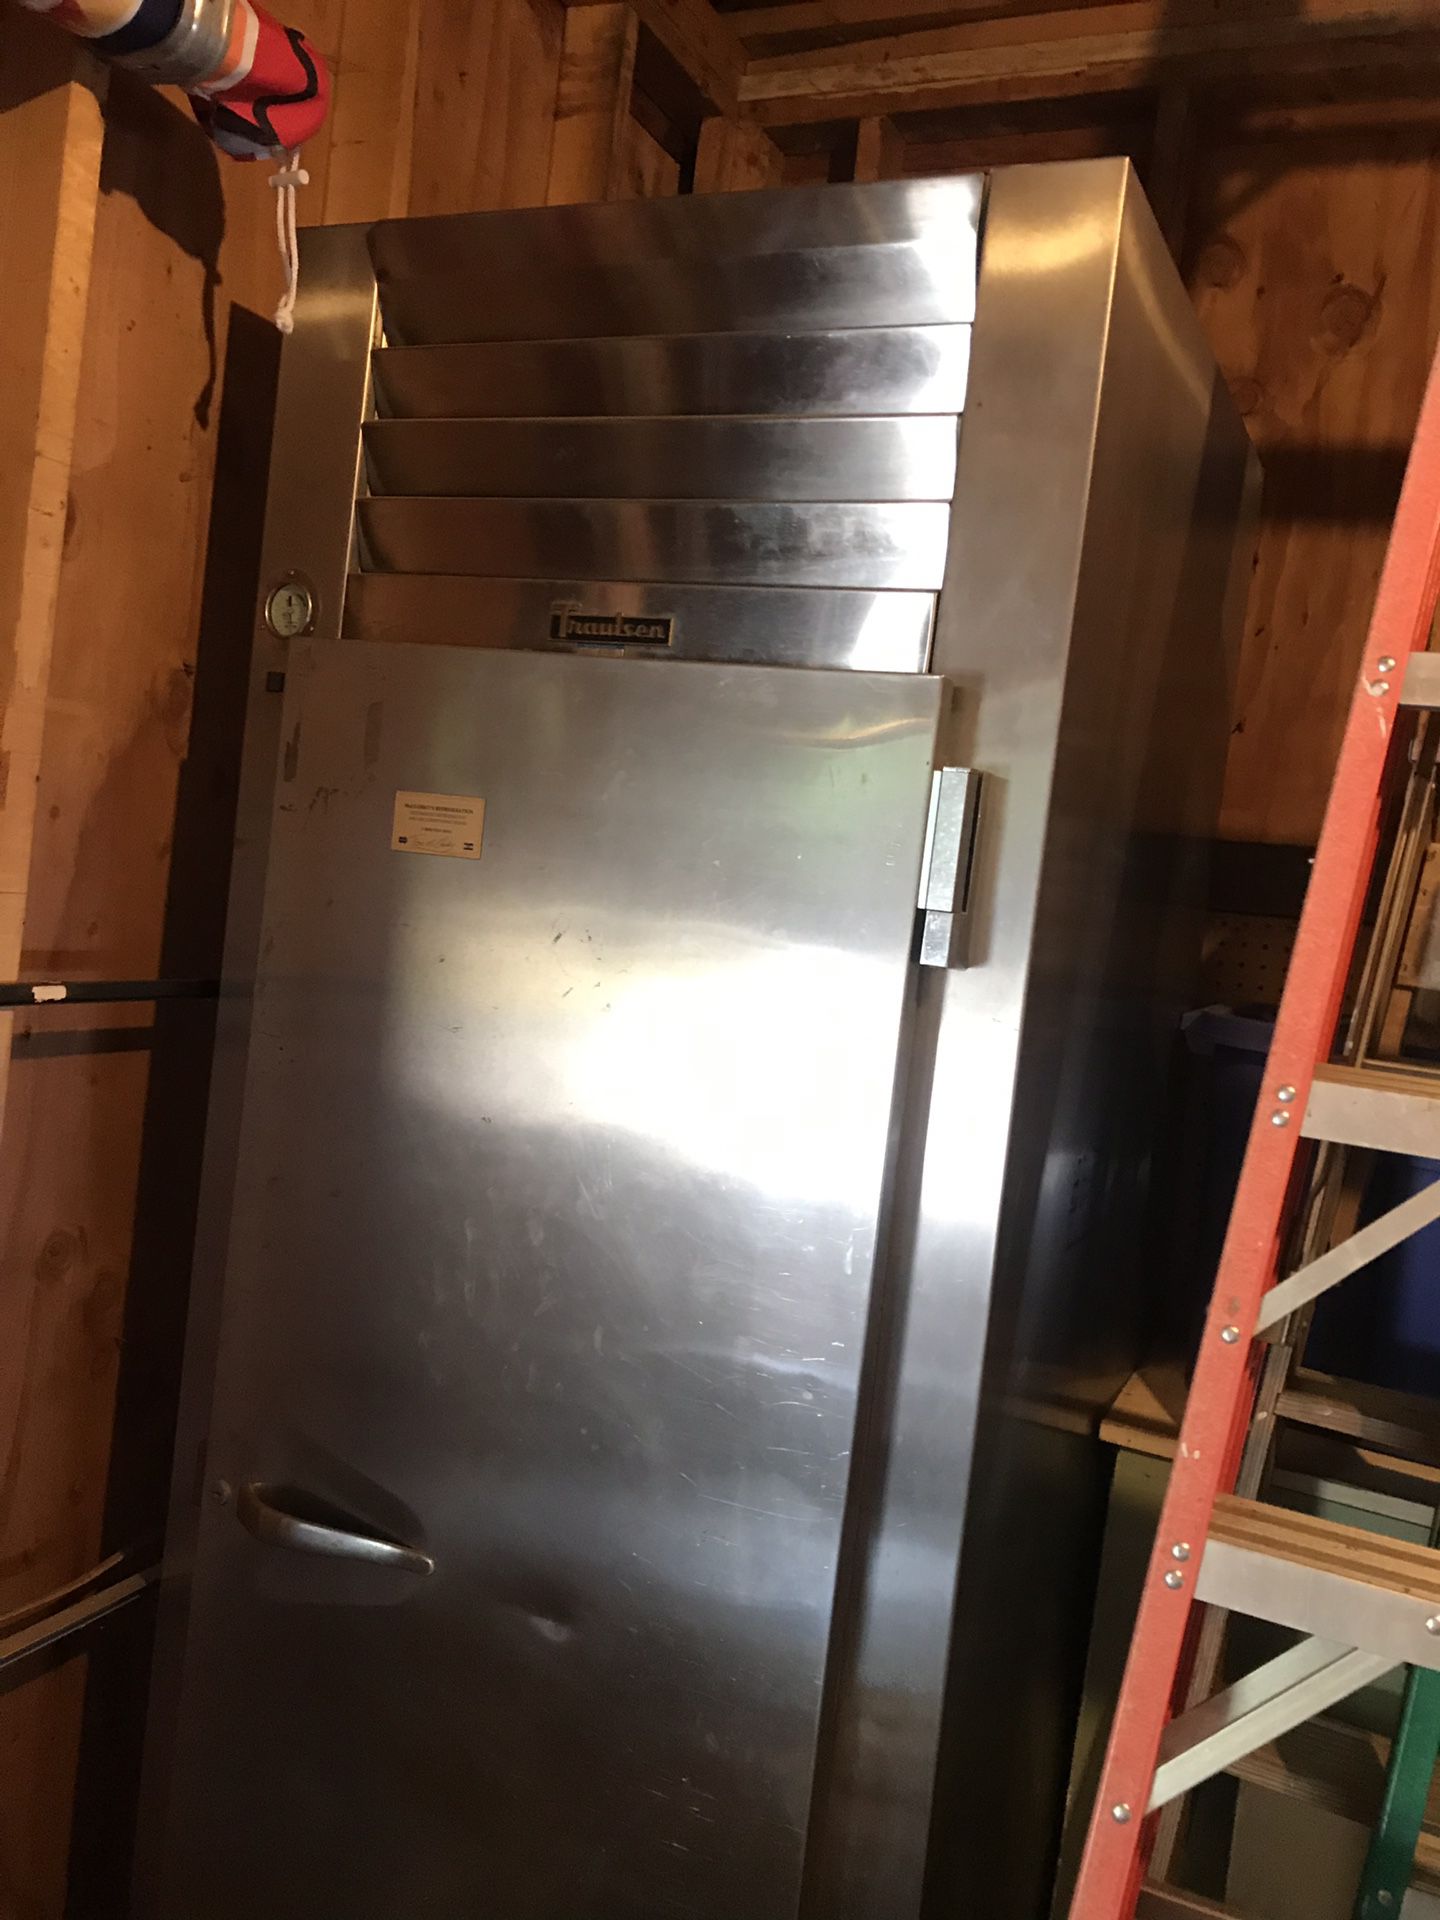 Traulsen commercial refrigerator READY FOR PICKUP!